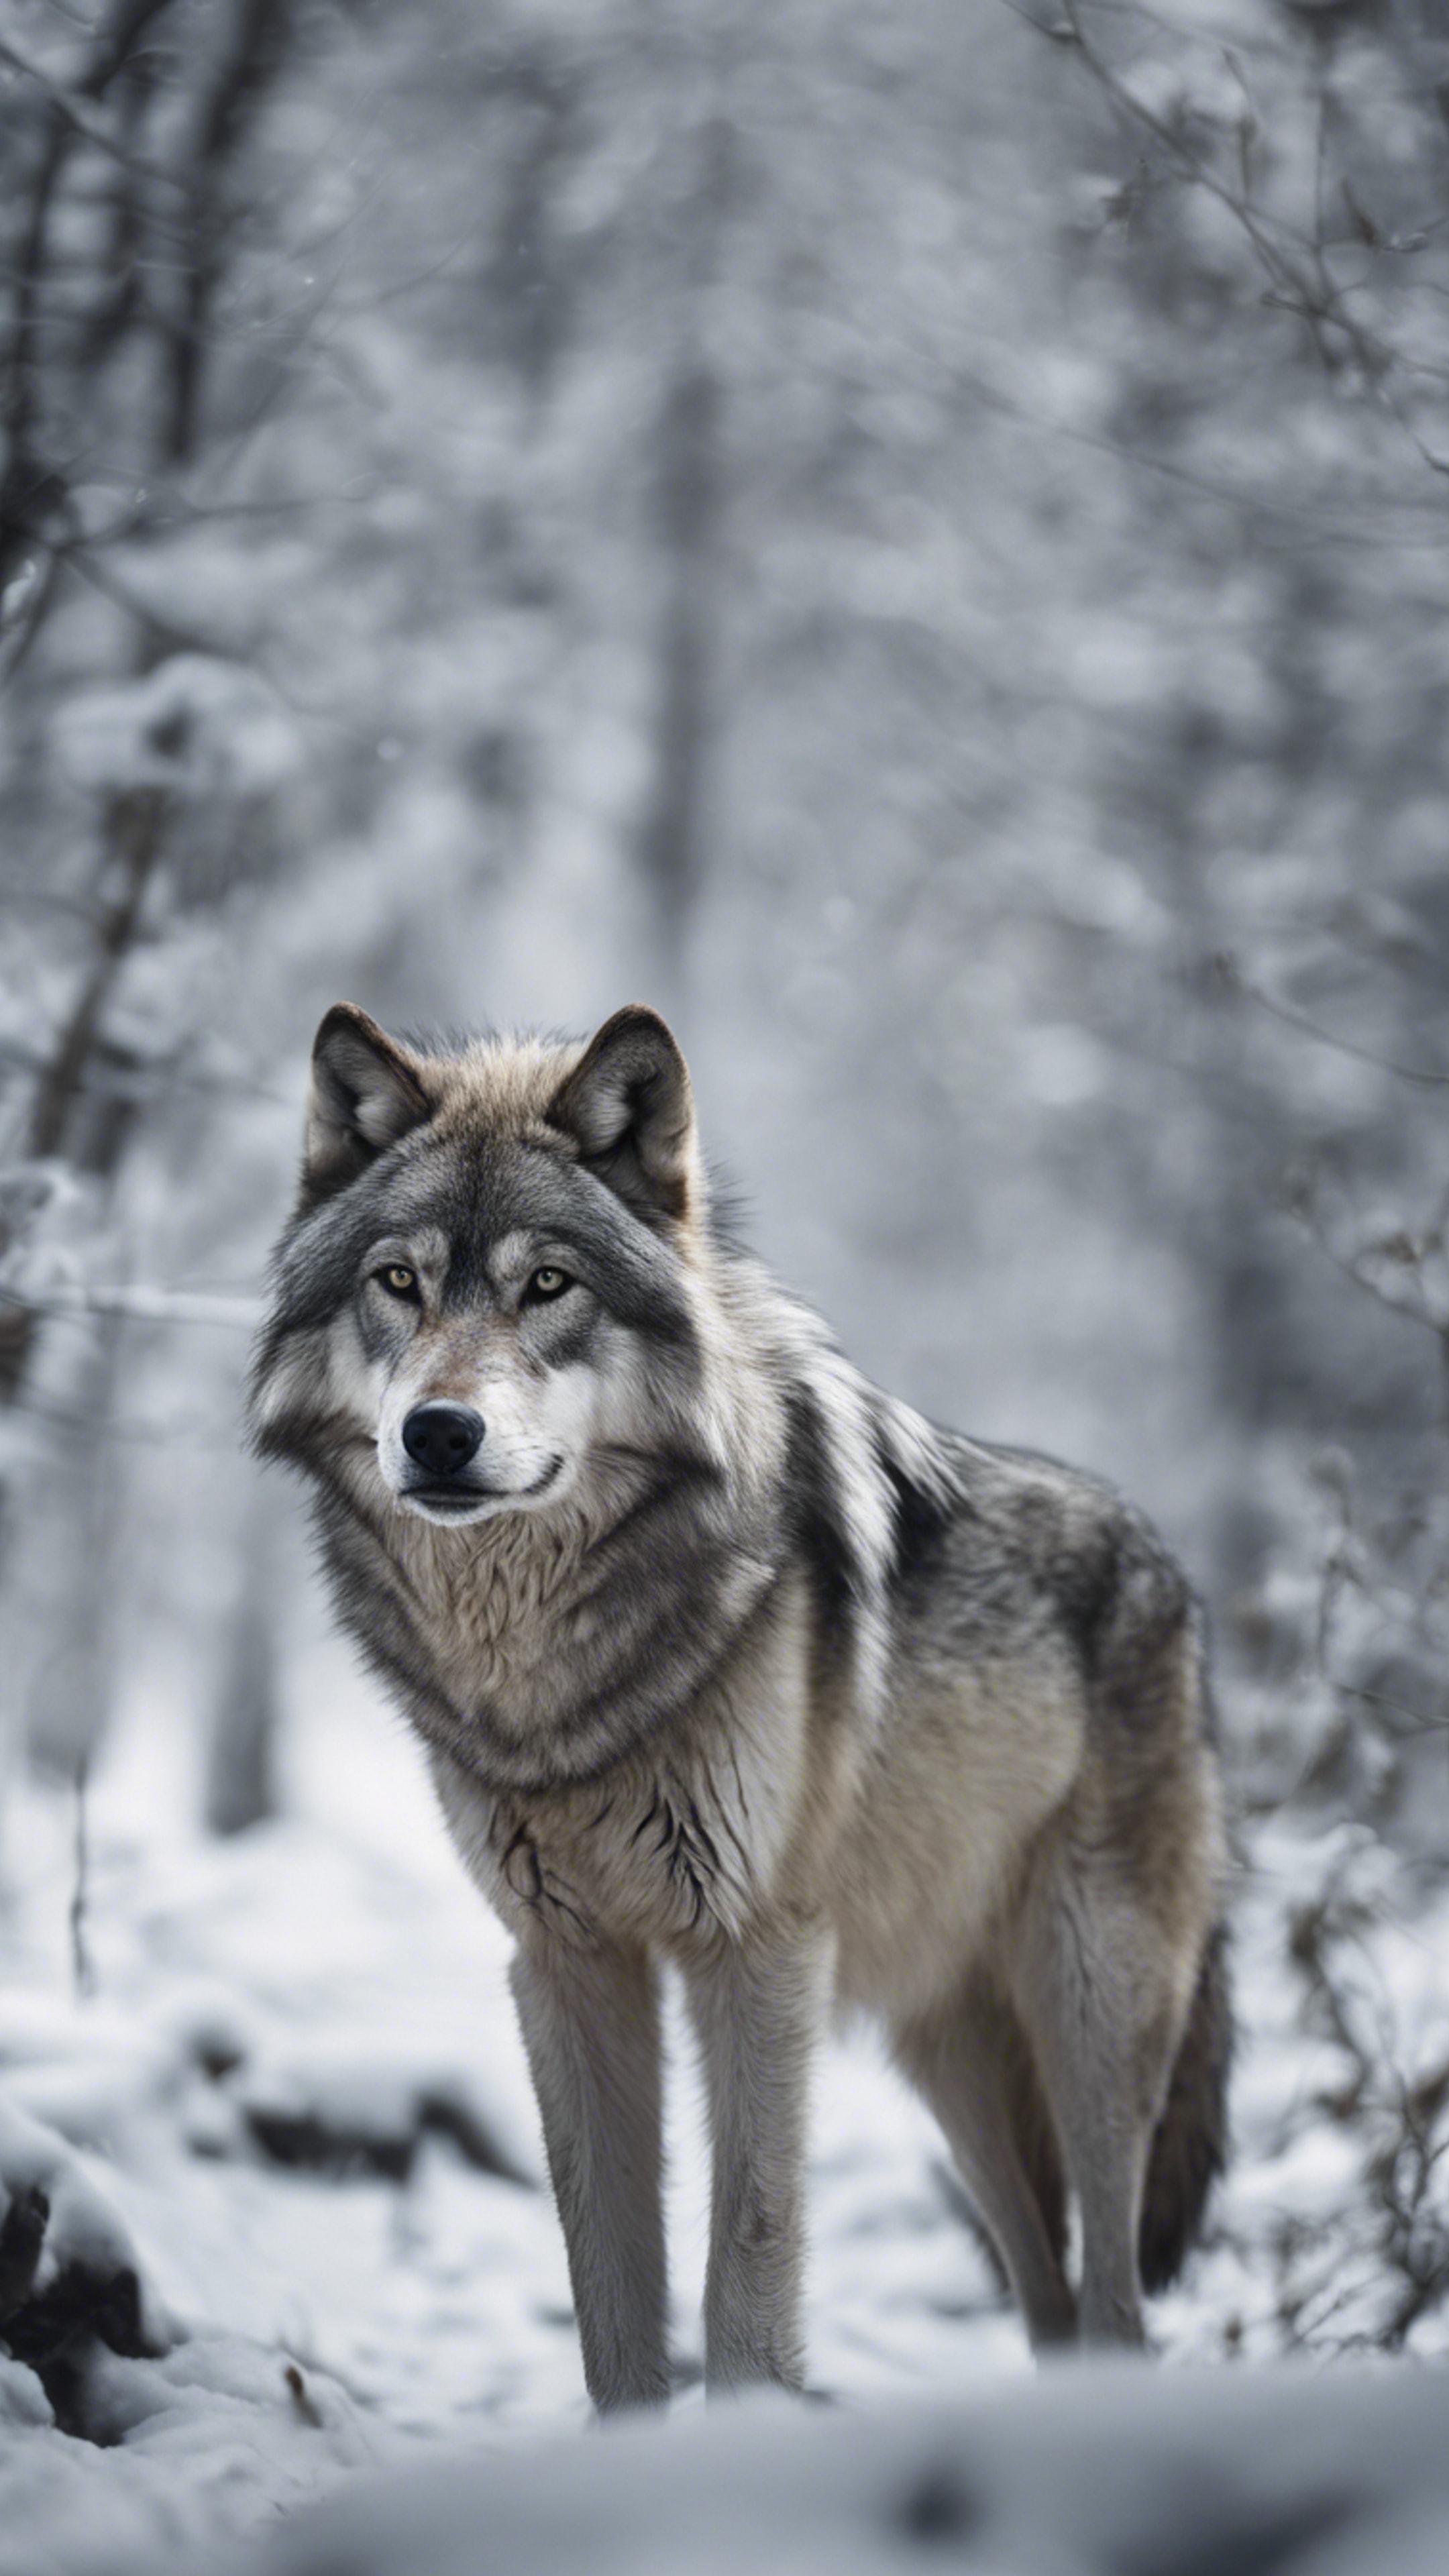 A wild timber wolf in light gray, prowling through a dense snowy forest.壁紙[8b3386c8f6e940c89a97]